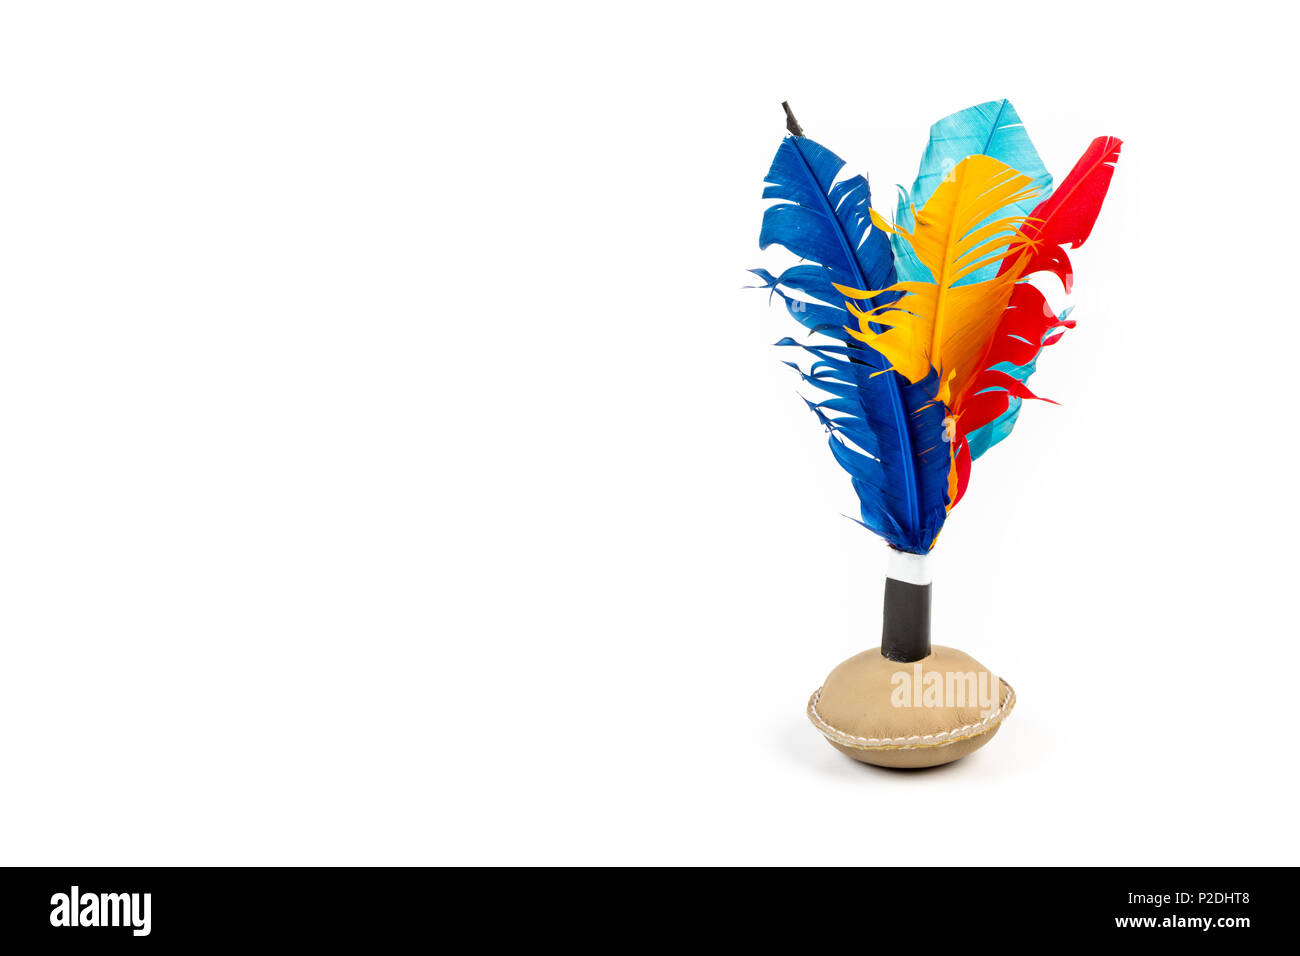 Close up of handmade shuttlecock toy with colourful feathers on white background. Stock Photo